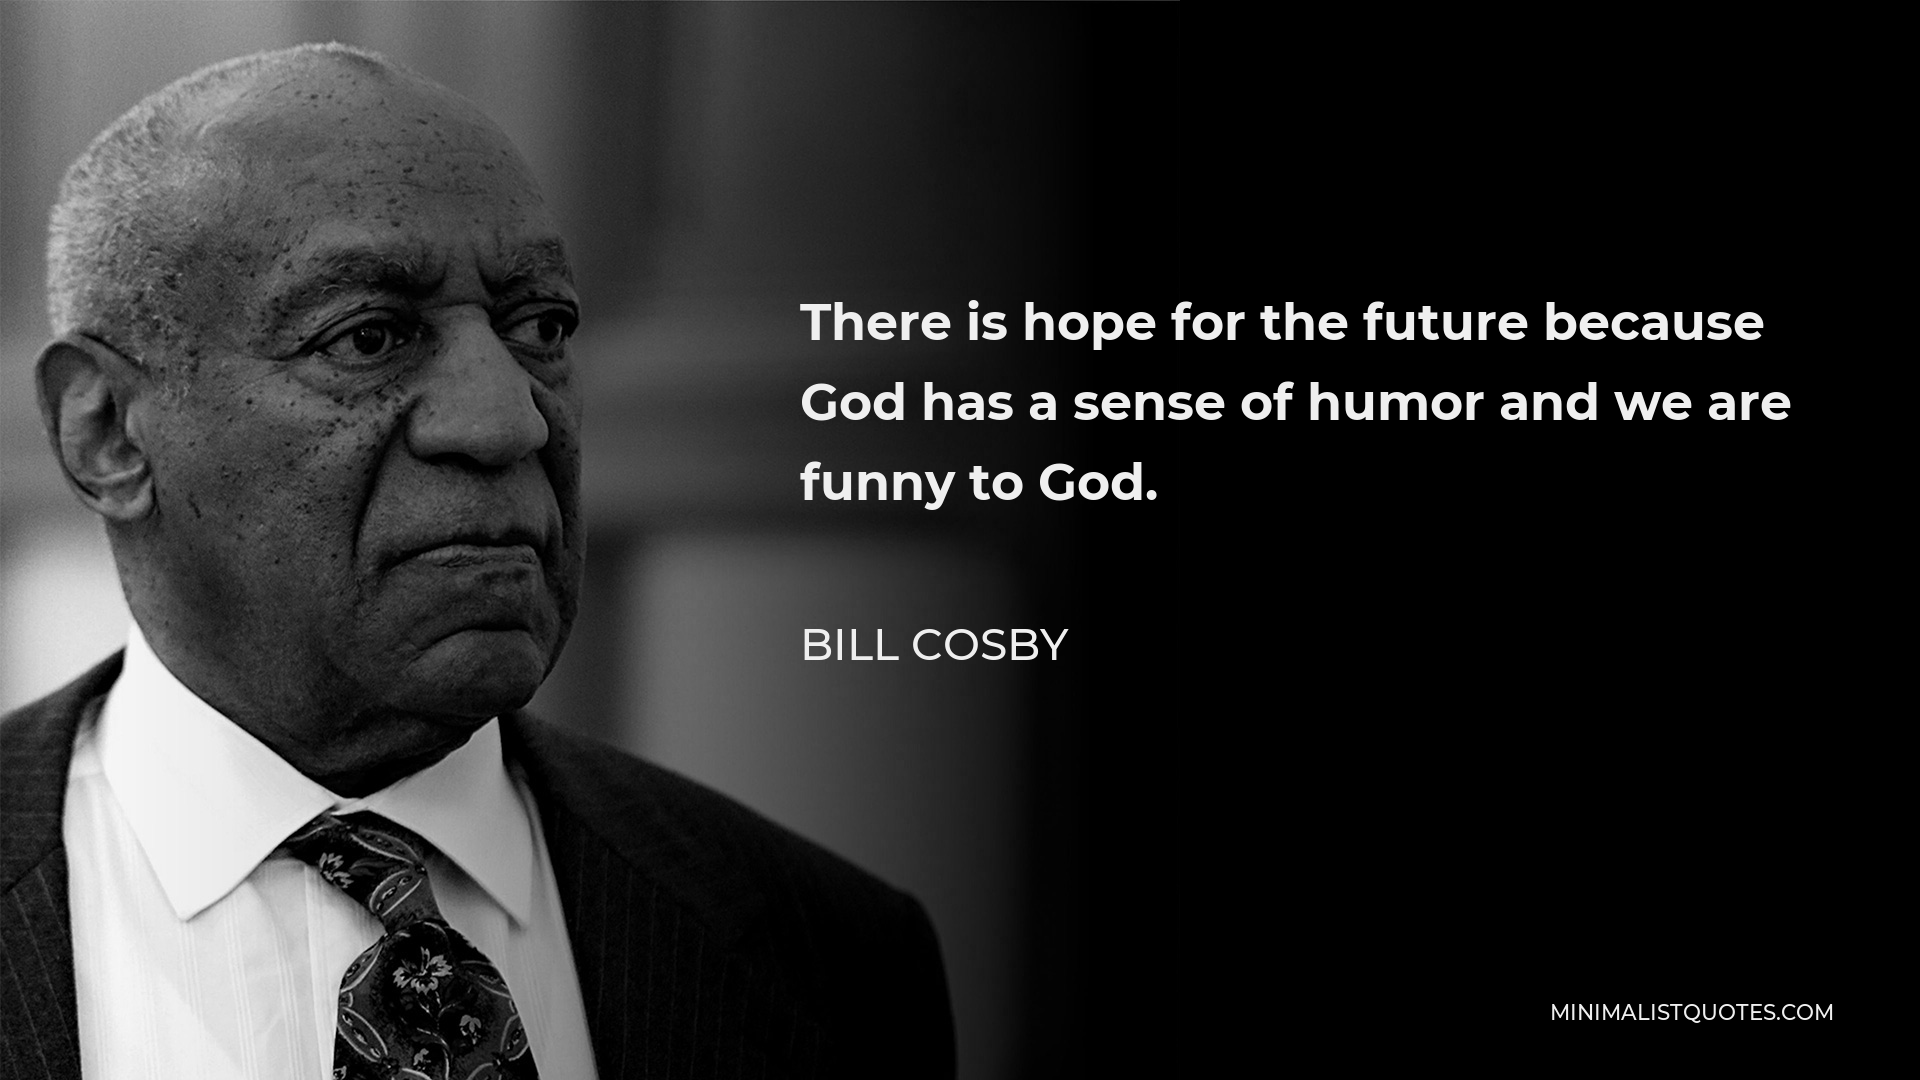 Bill Cosby Quote - There is hope for the future because God has a sense of humor and we are funny to God.